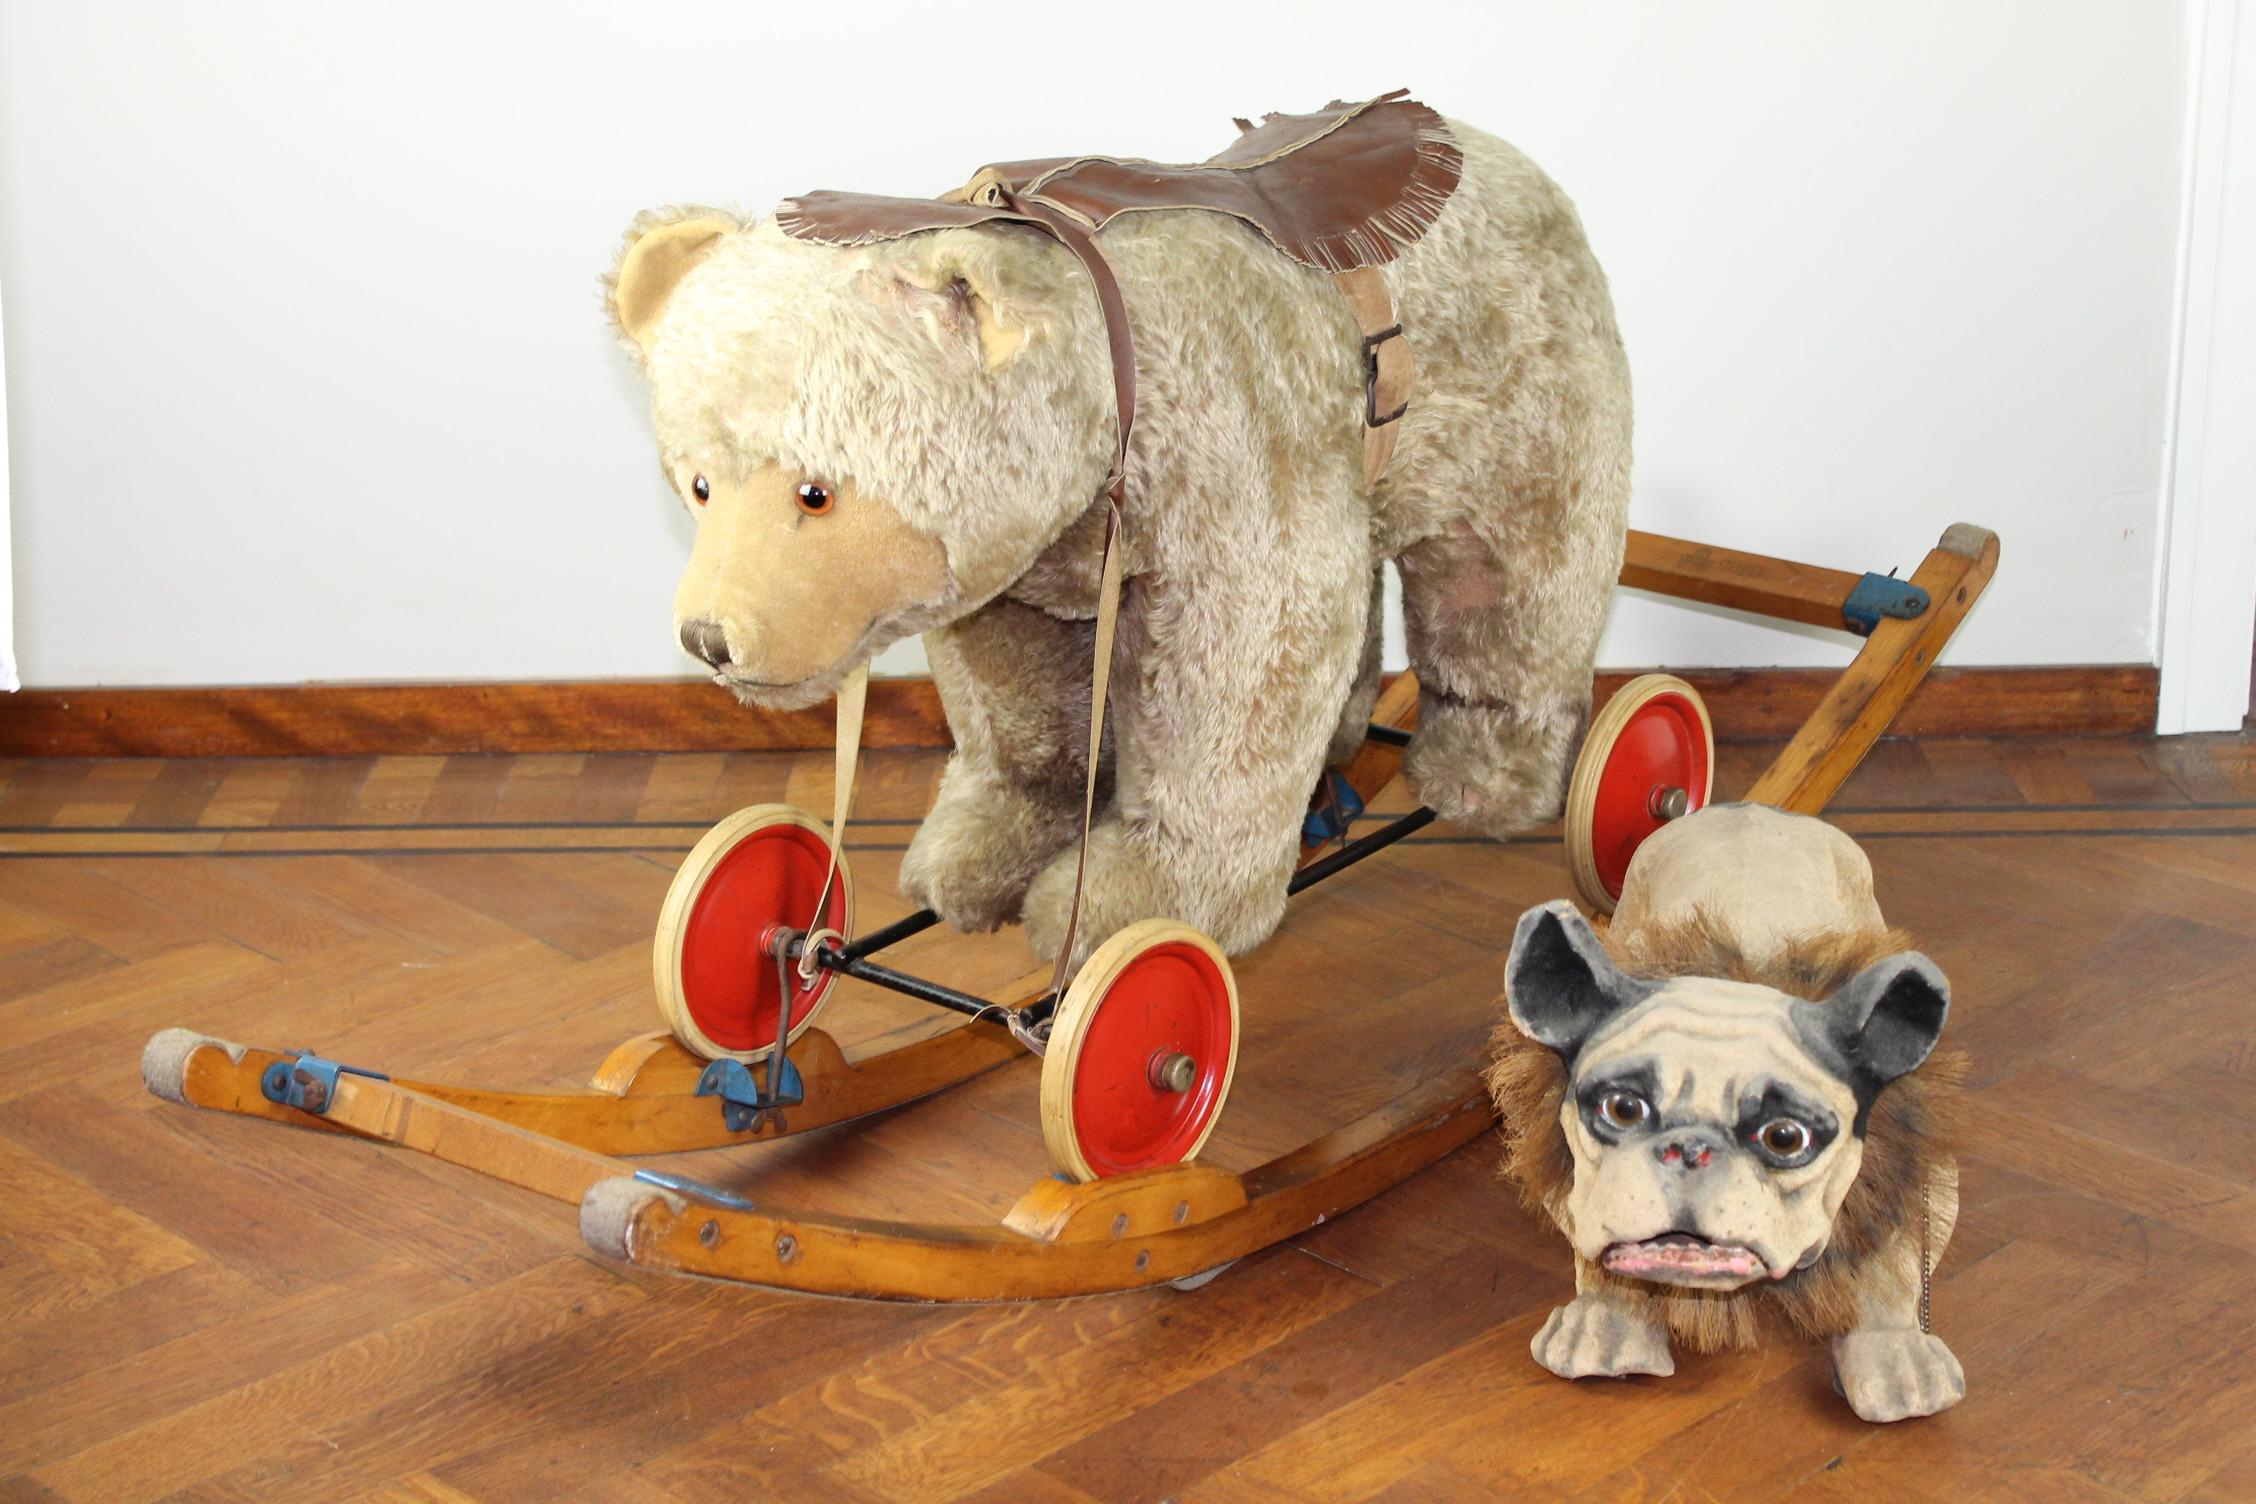 Fabulous large vintage pull toy - riding toy - rocking teddy bear toy.
Mid-20th century toy - Children's ride on toy.
Made by the famous German manufacturer Steiff, bear placed on rocker 9860.
Dates from the 1950s.
The bear is in good but played